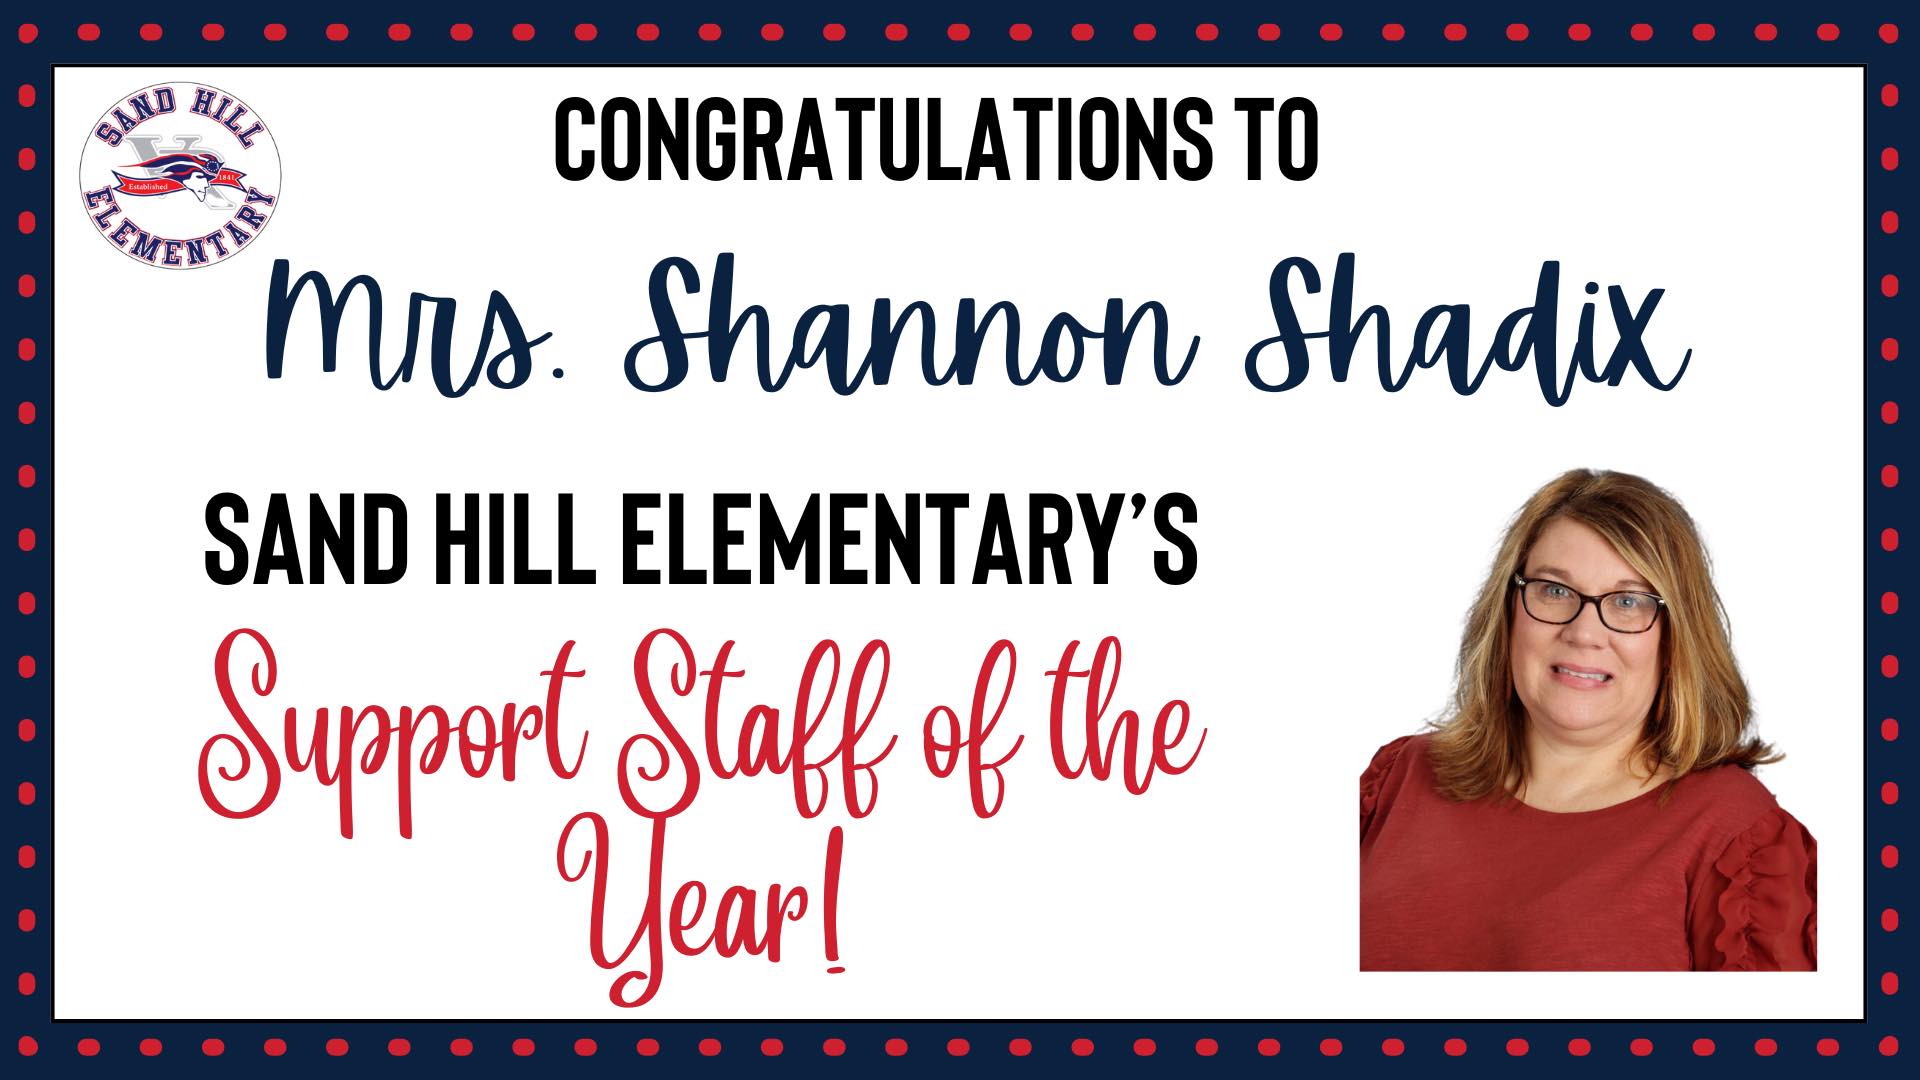 Assistant of the Year Shannon Shadix